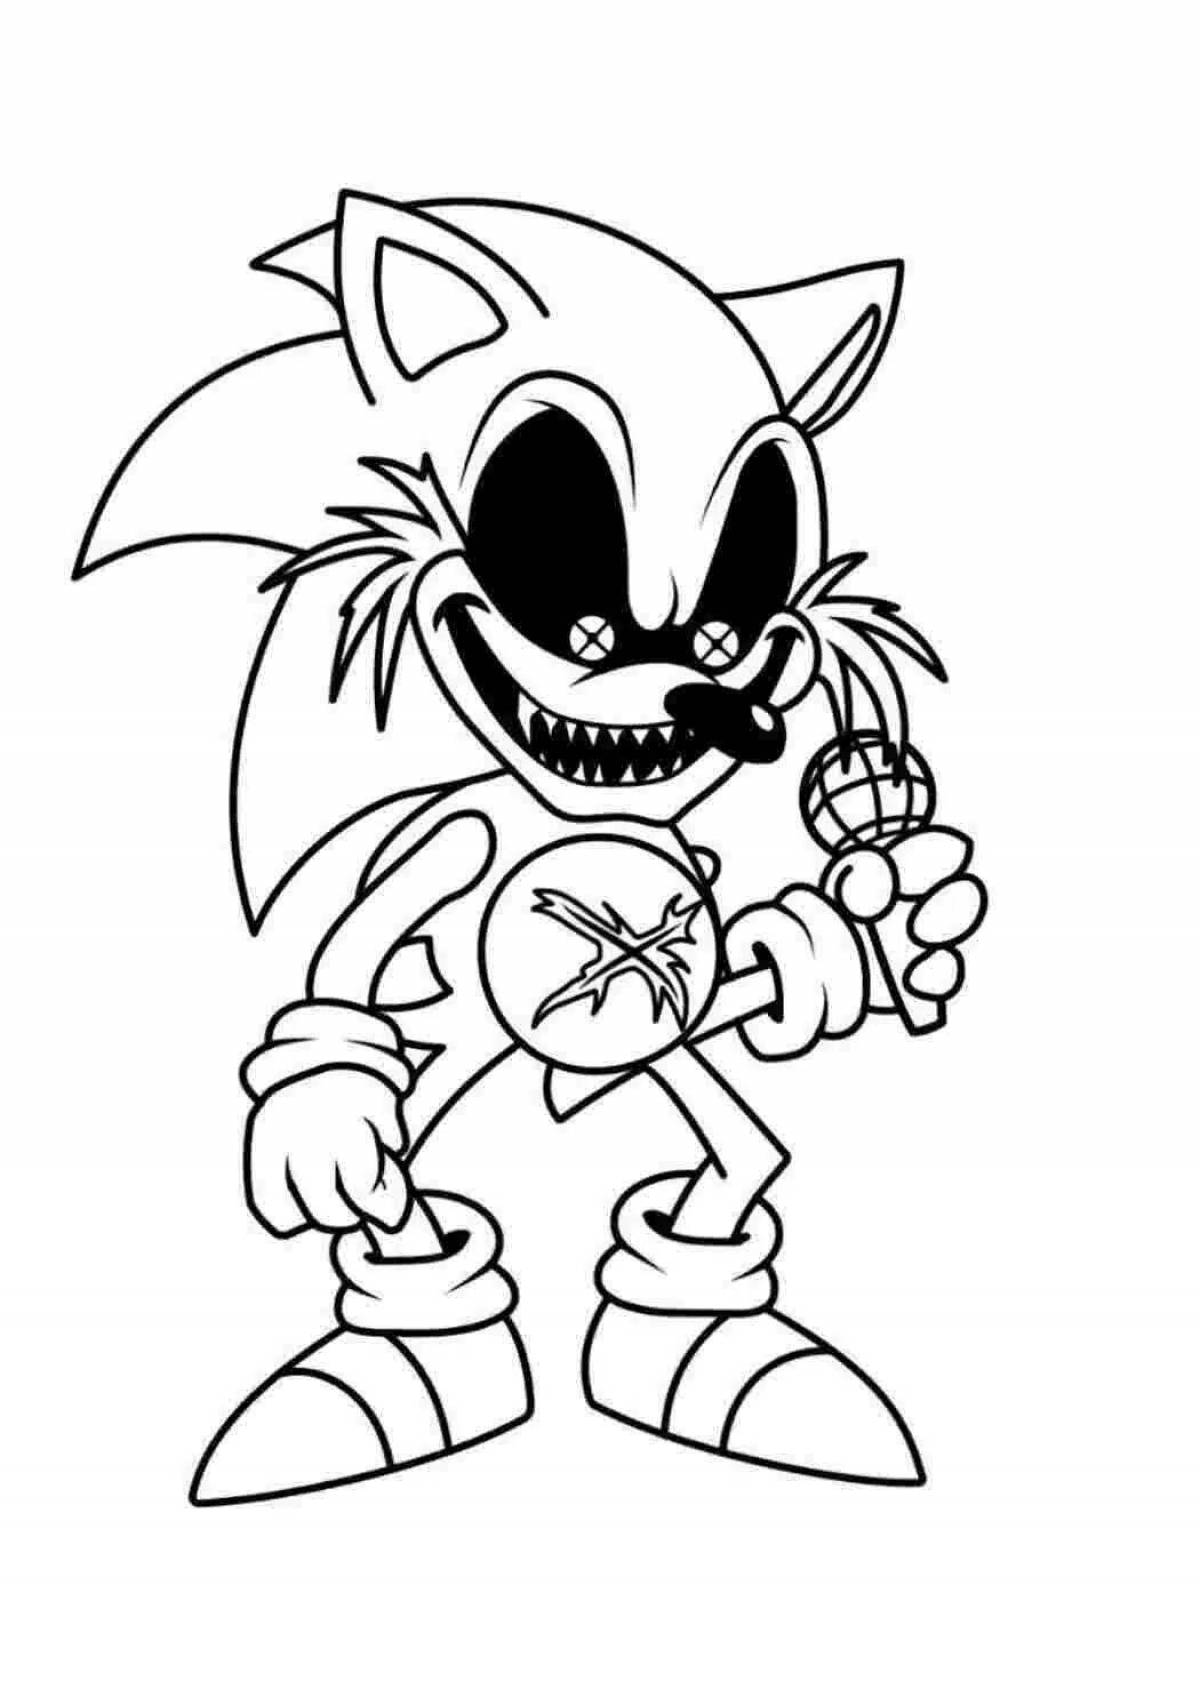 Coloring sonic exe for kids